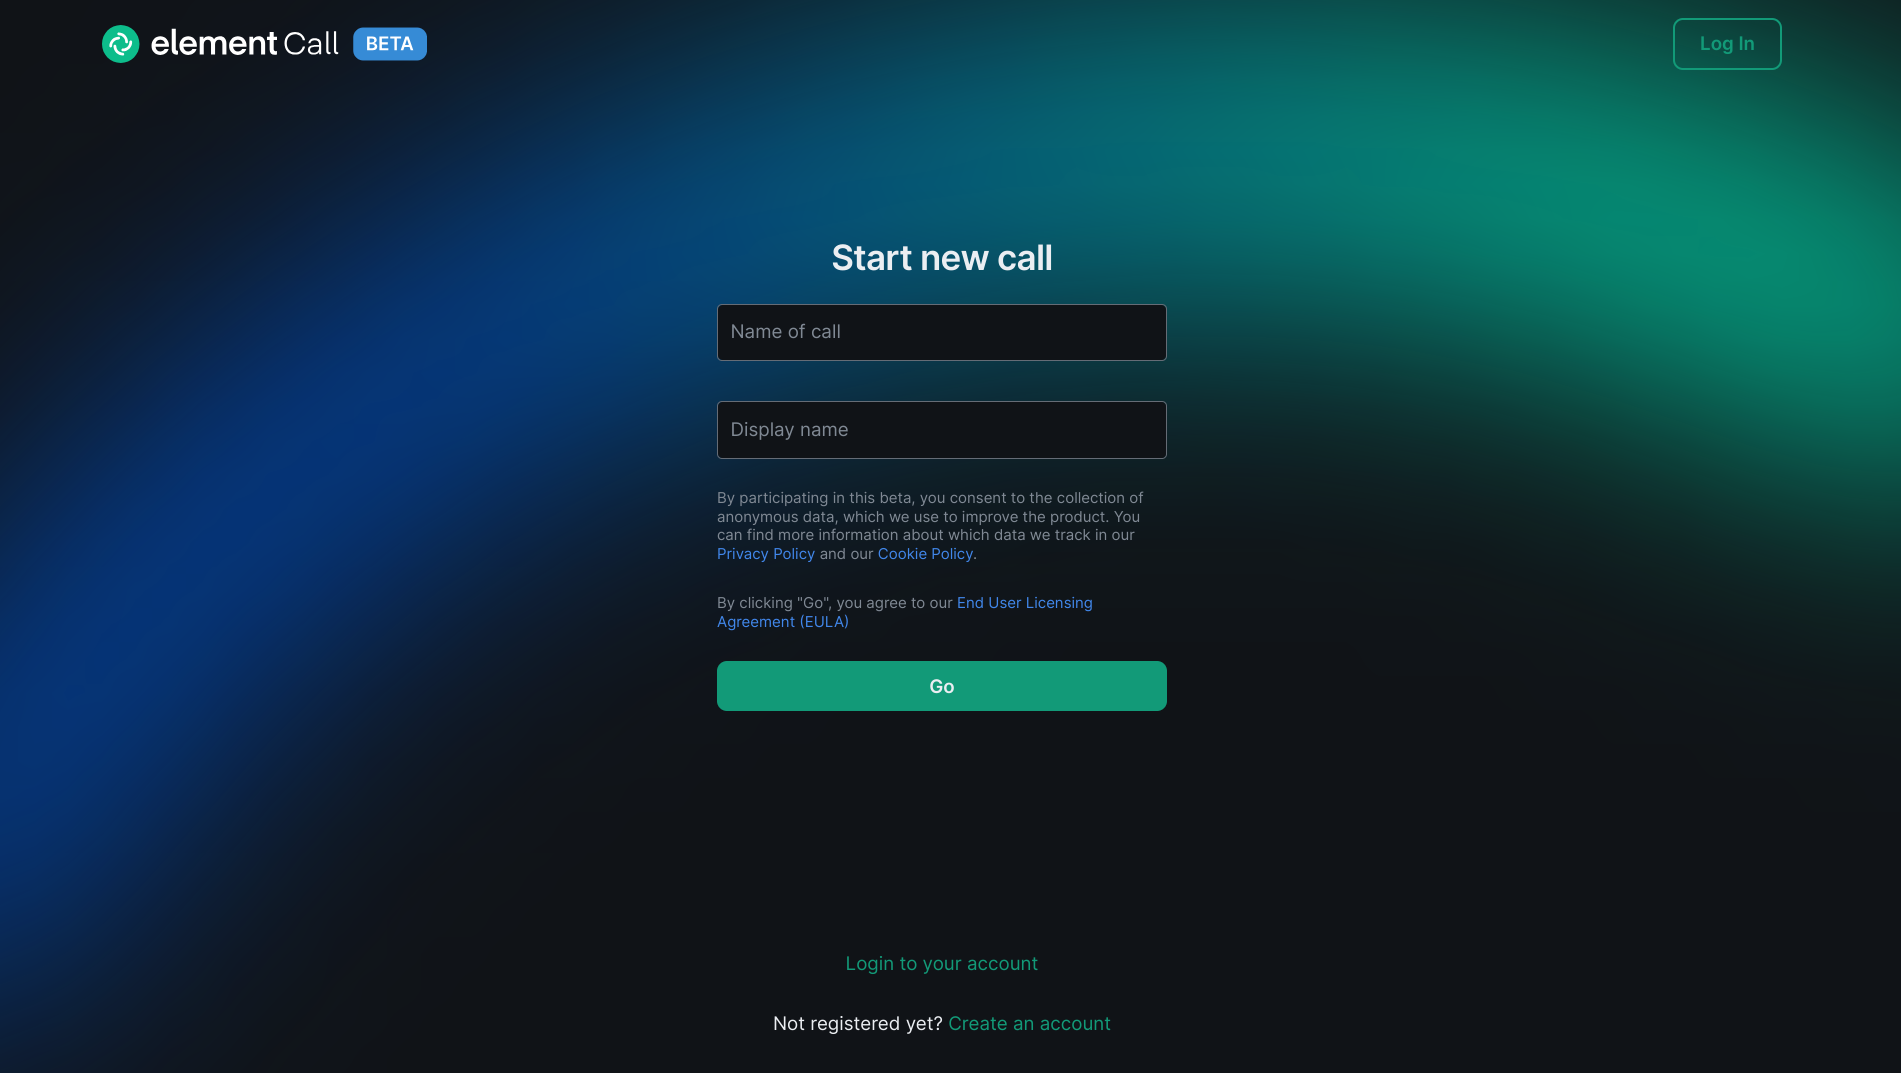 Interested in an open-source decentralized teleconferencing solution? Try out Element.